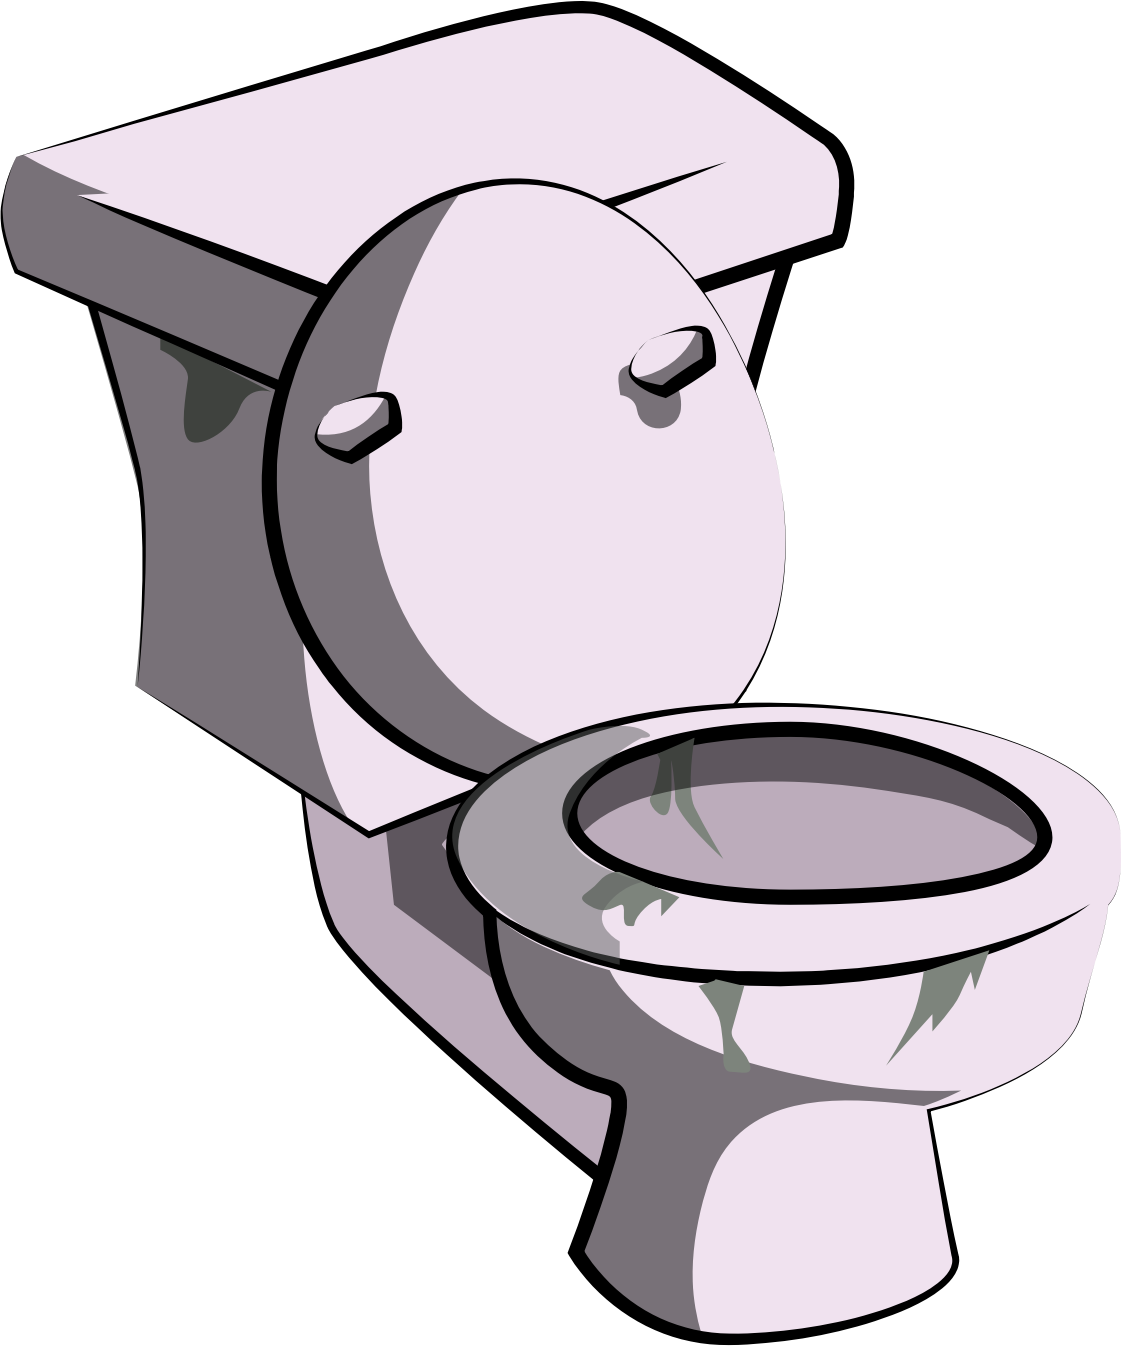 Bathroom Vector PNG Image High Quality PNG Image